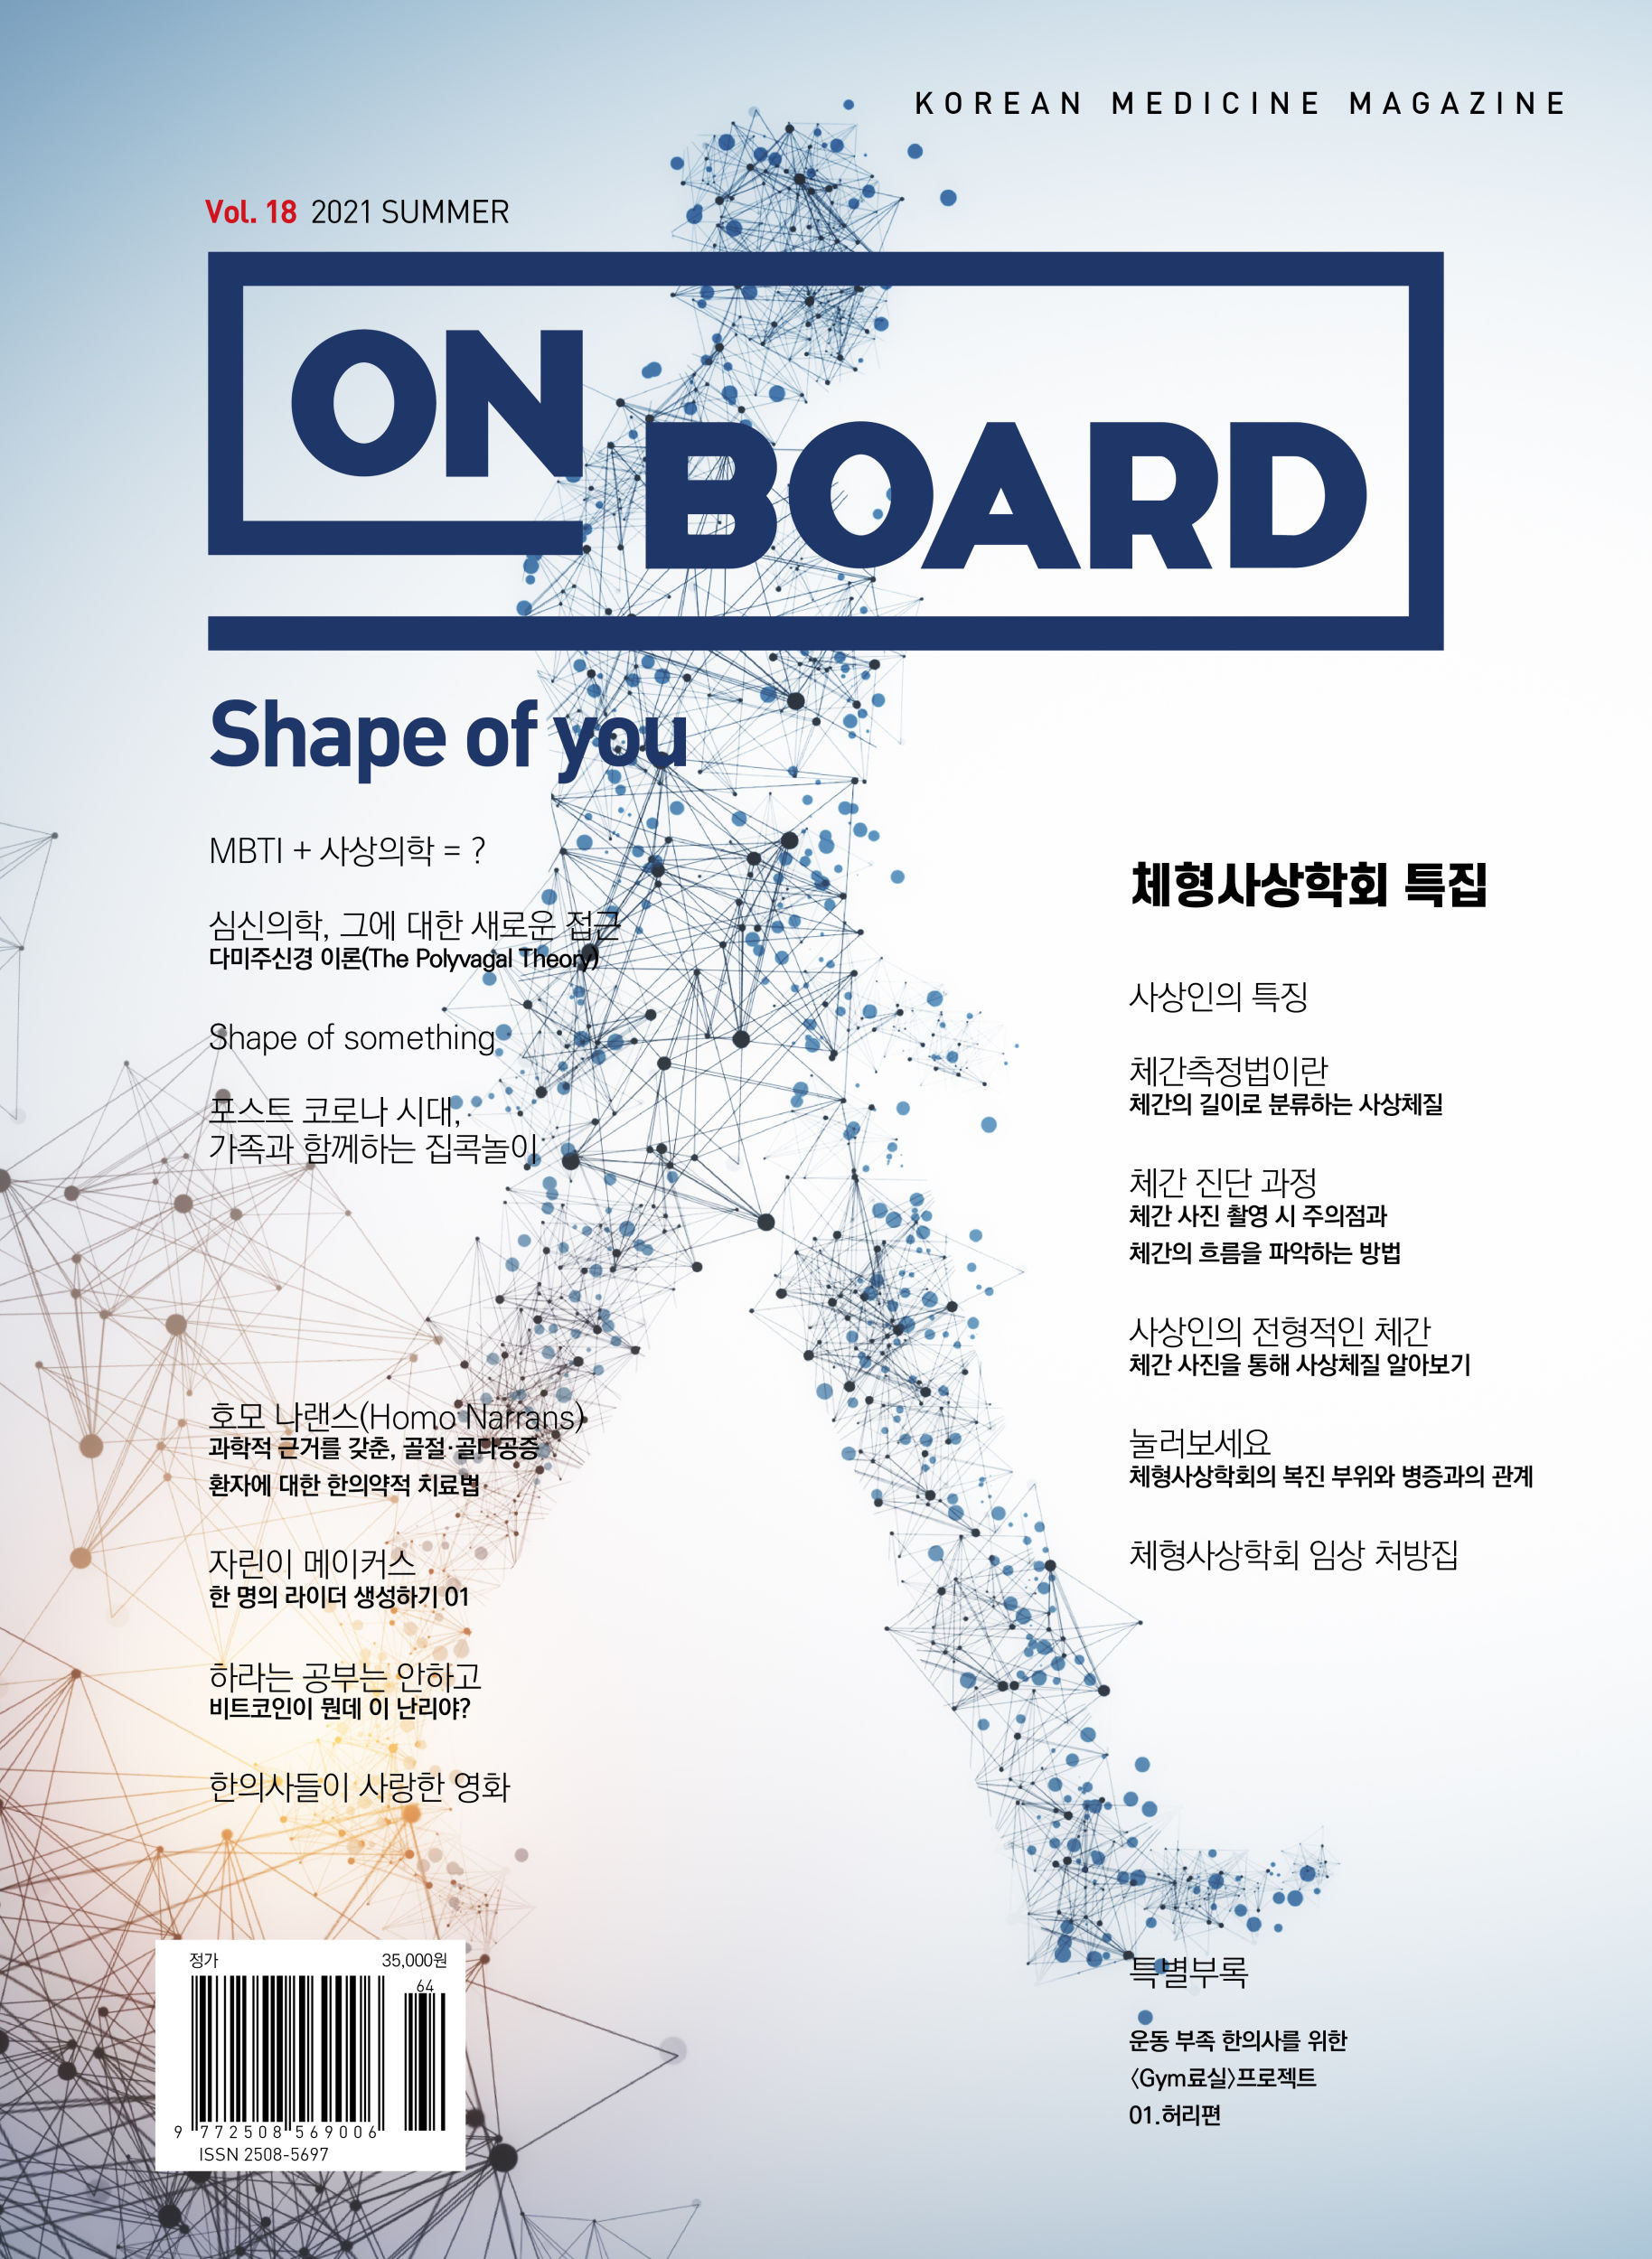 Shape of you 이미지